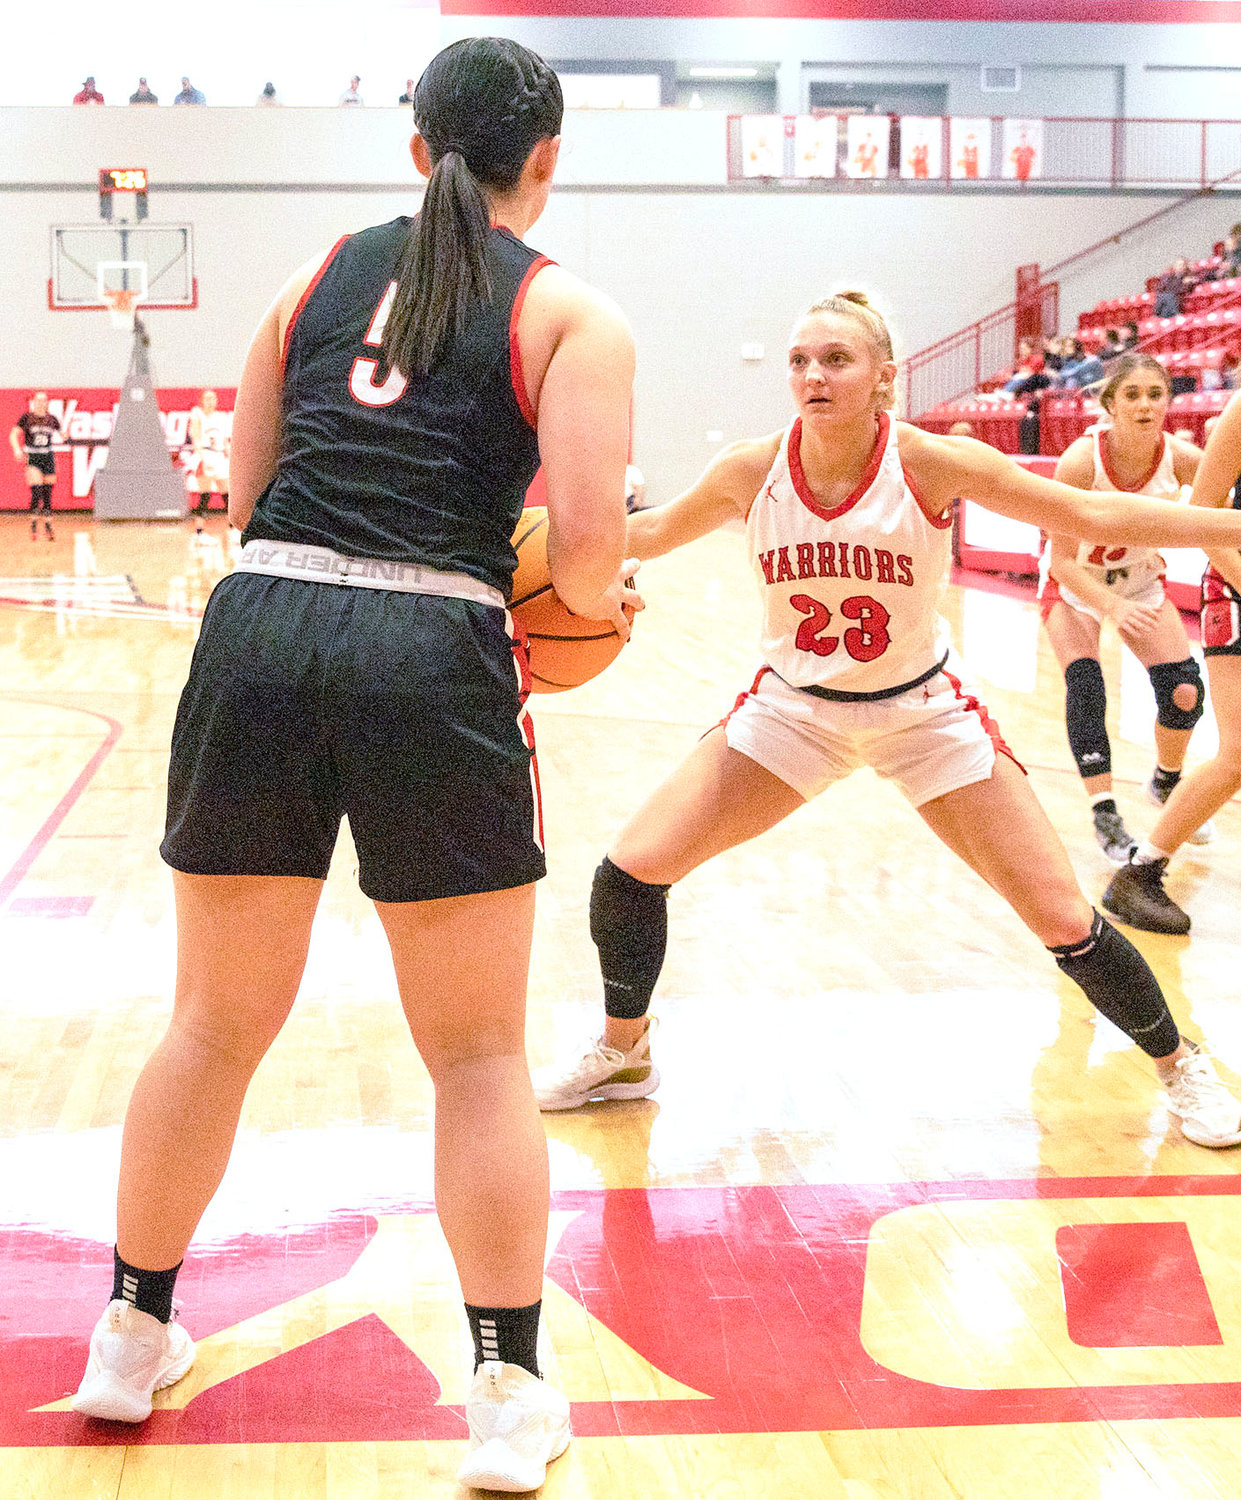 Washington senior Mattie Richardson guards the inbounds play during the Warriors’ 51-32 win over Pauls Valley. Richardson scored a team-high 16 points.